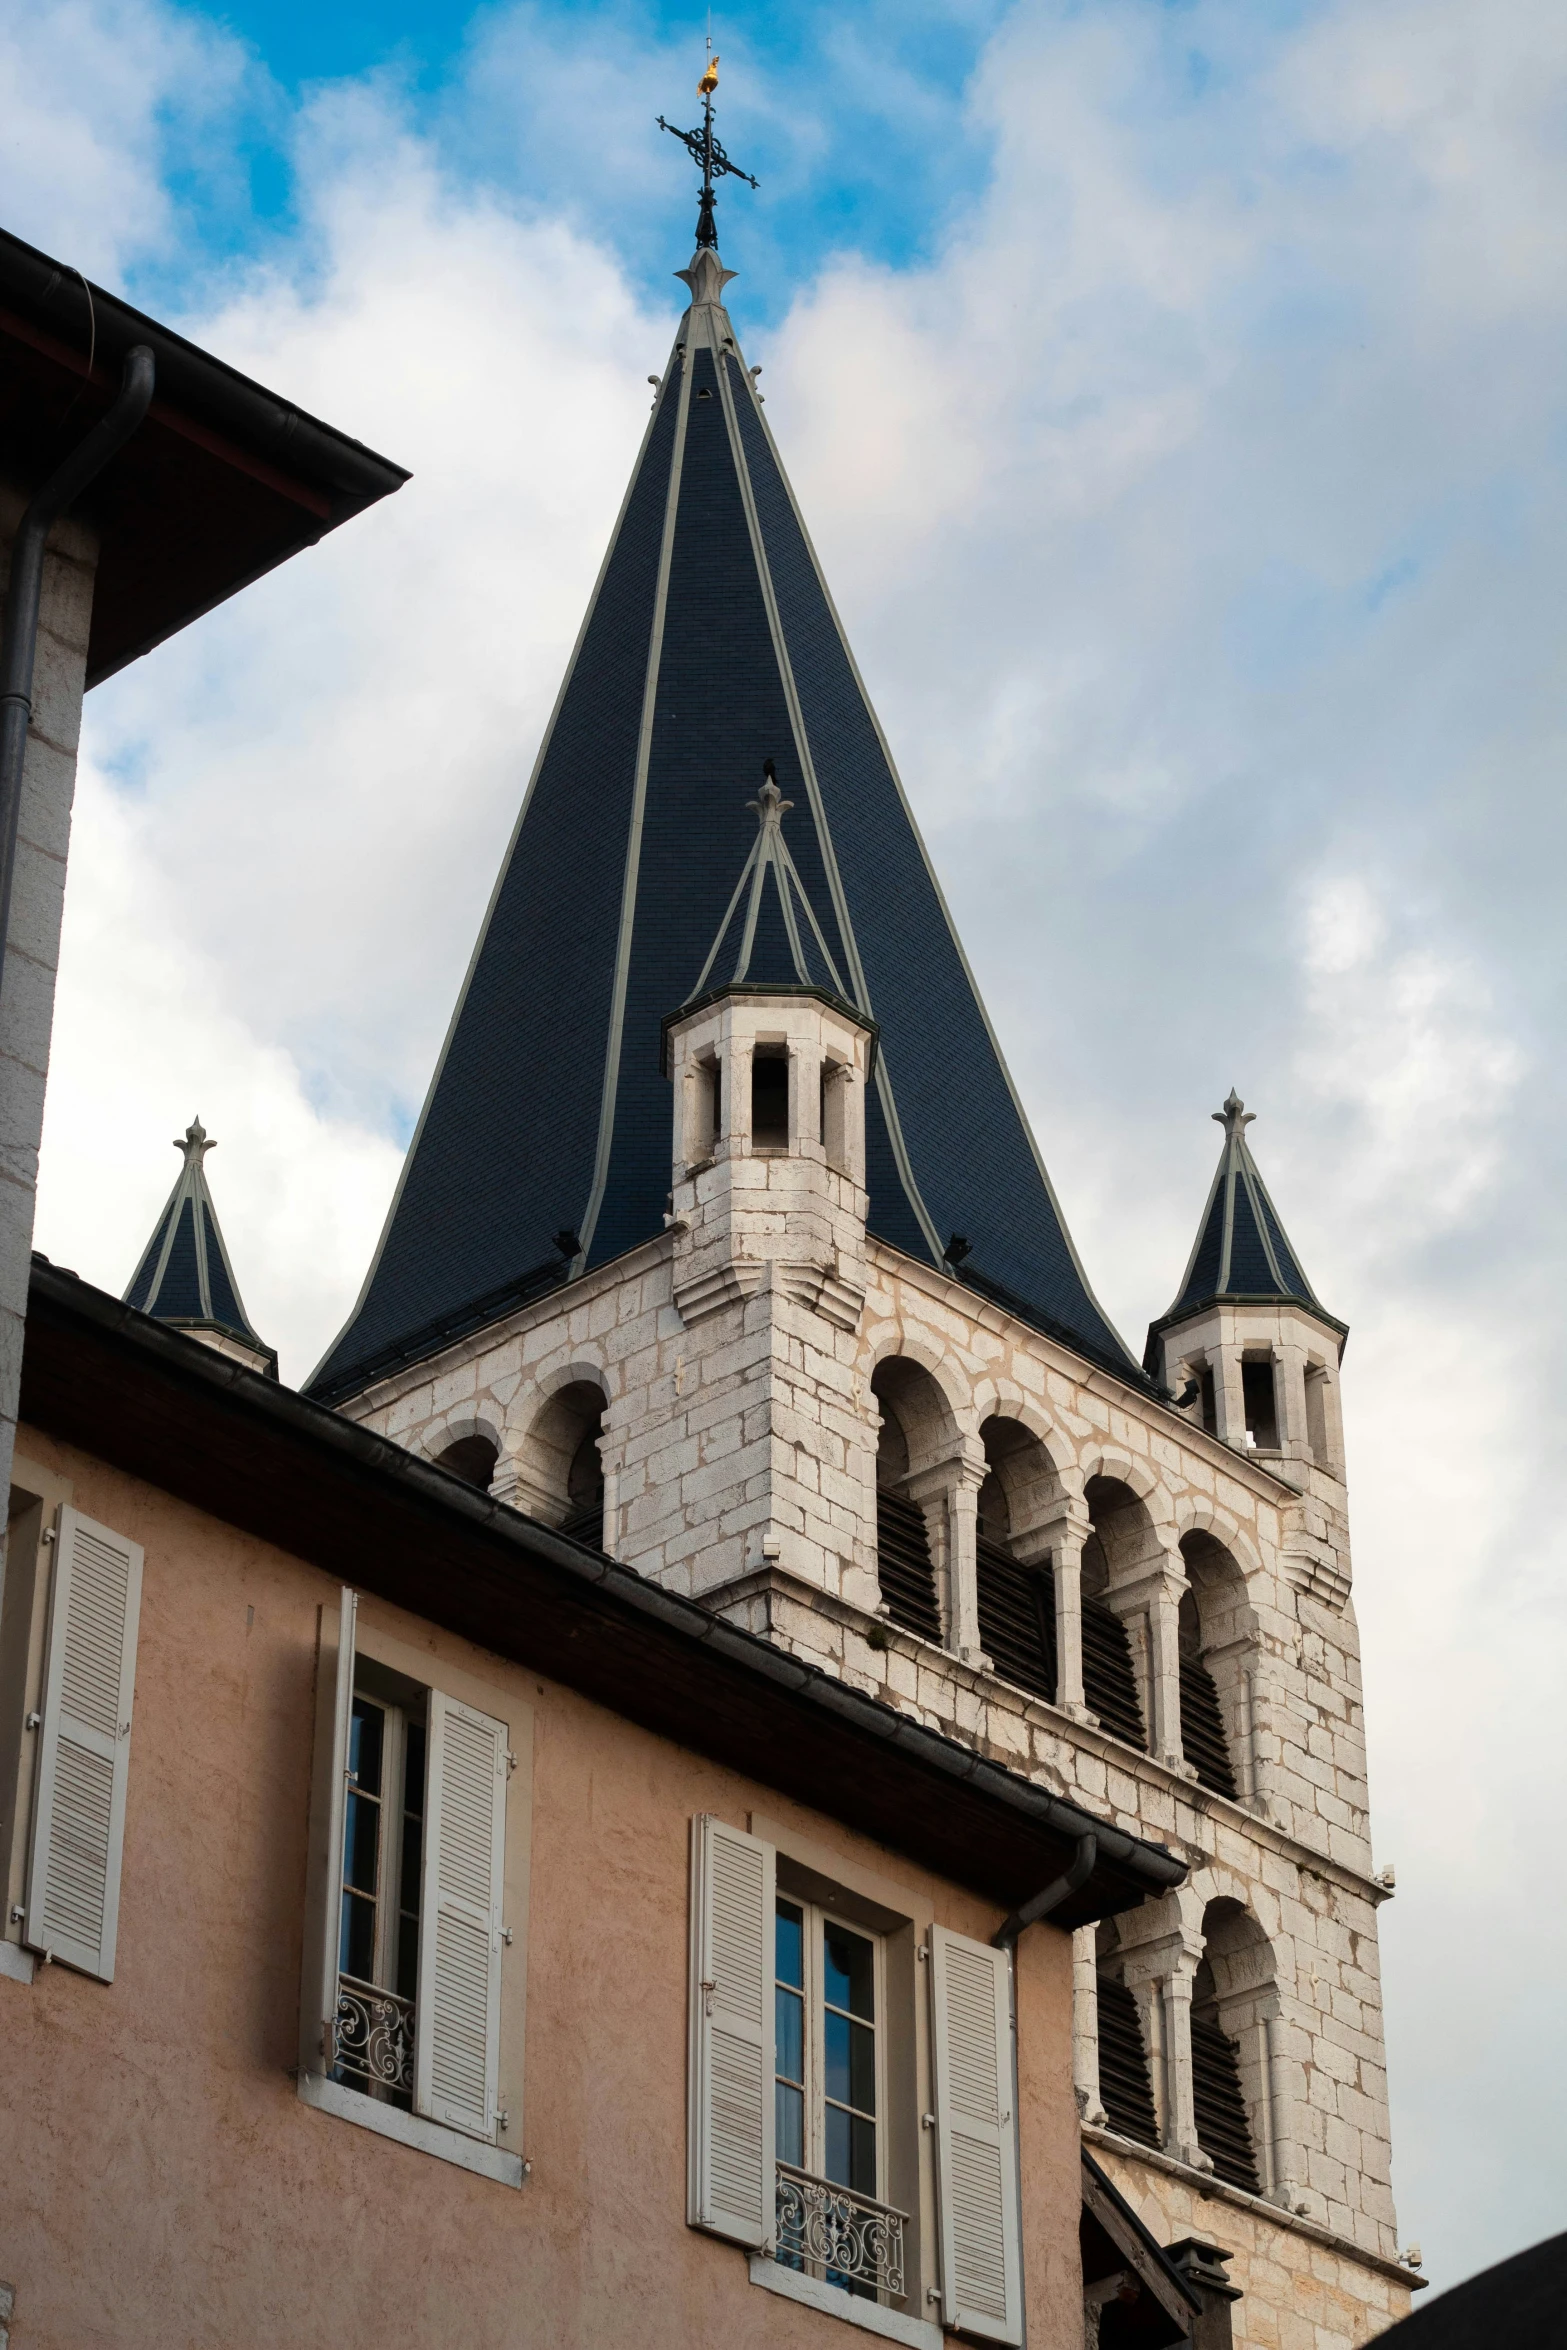 a view of an elegant, tall church steeple with two cupolaes